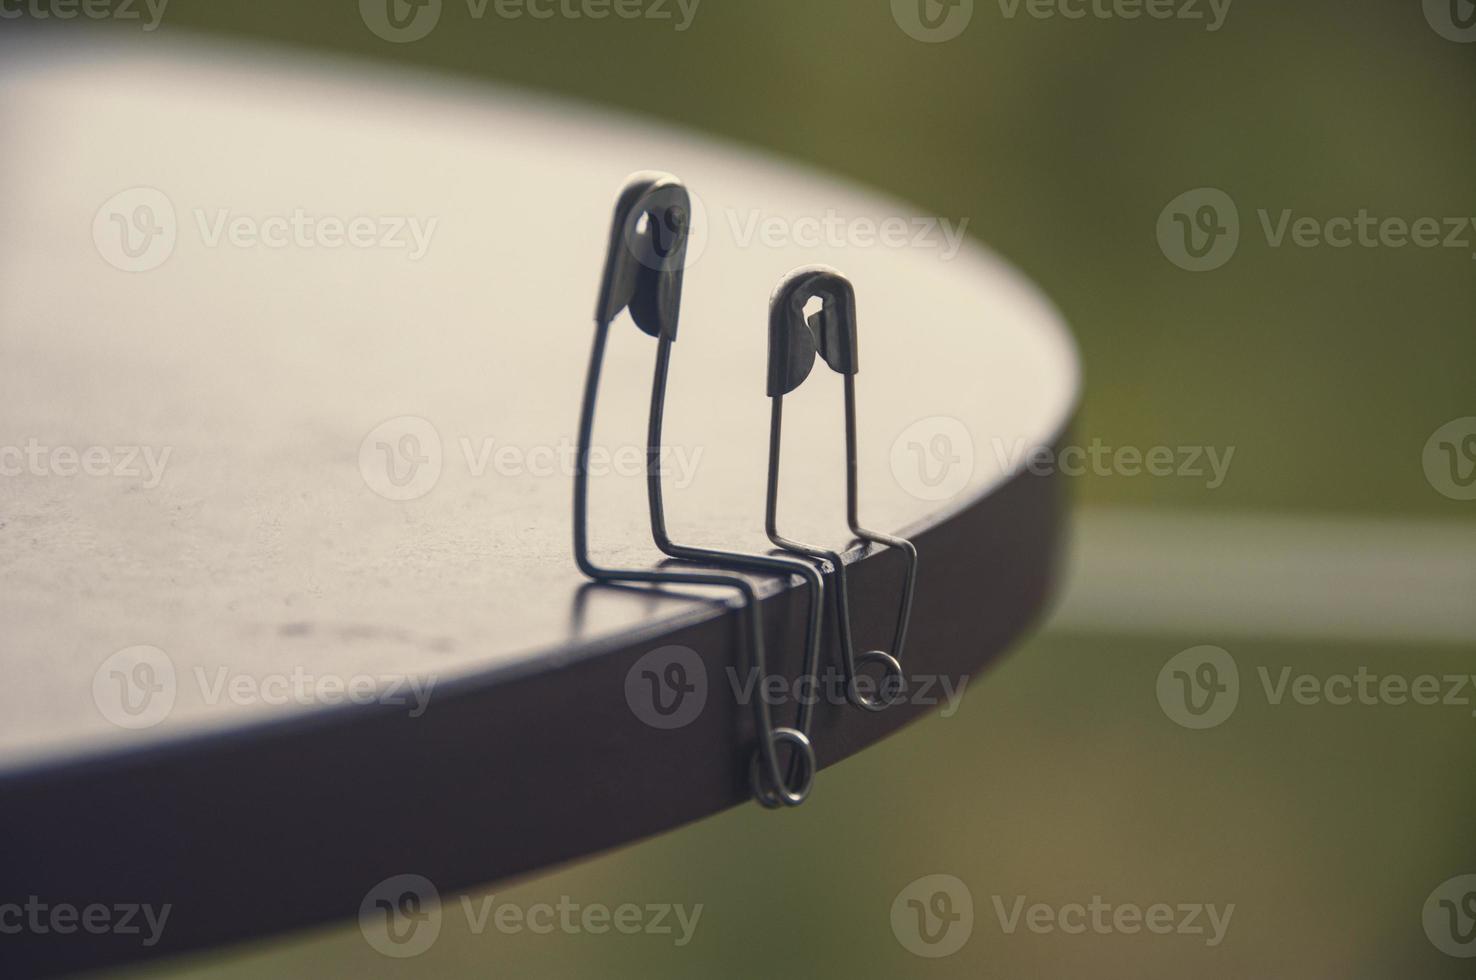 Model safety pin of father or mother and son or daughter sitting on wooden blocks. Family concept photo